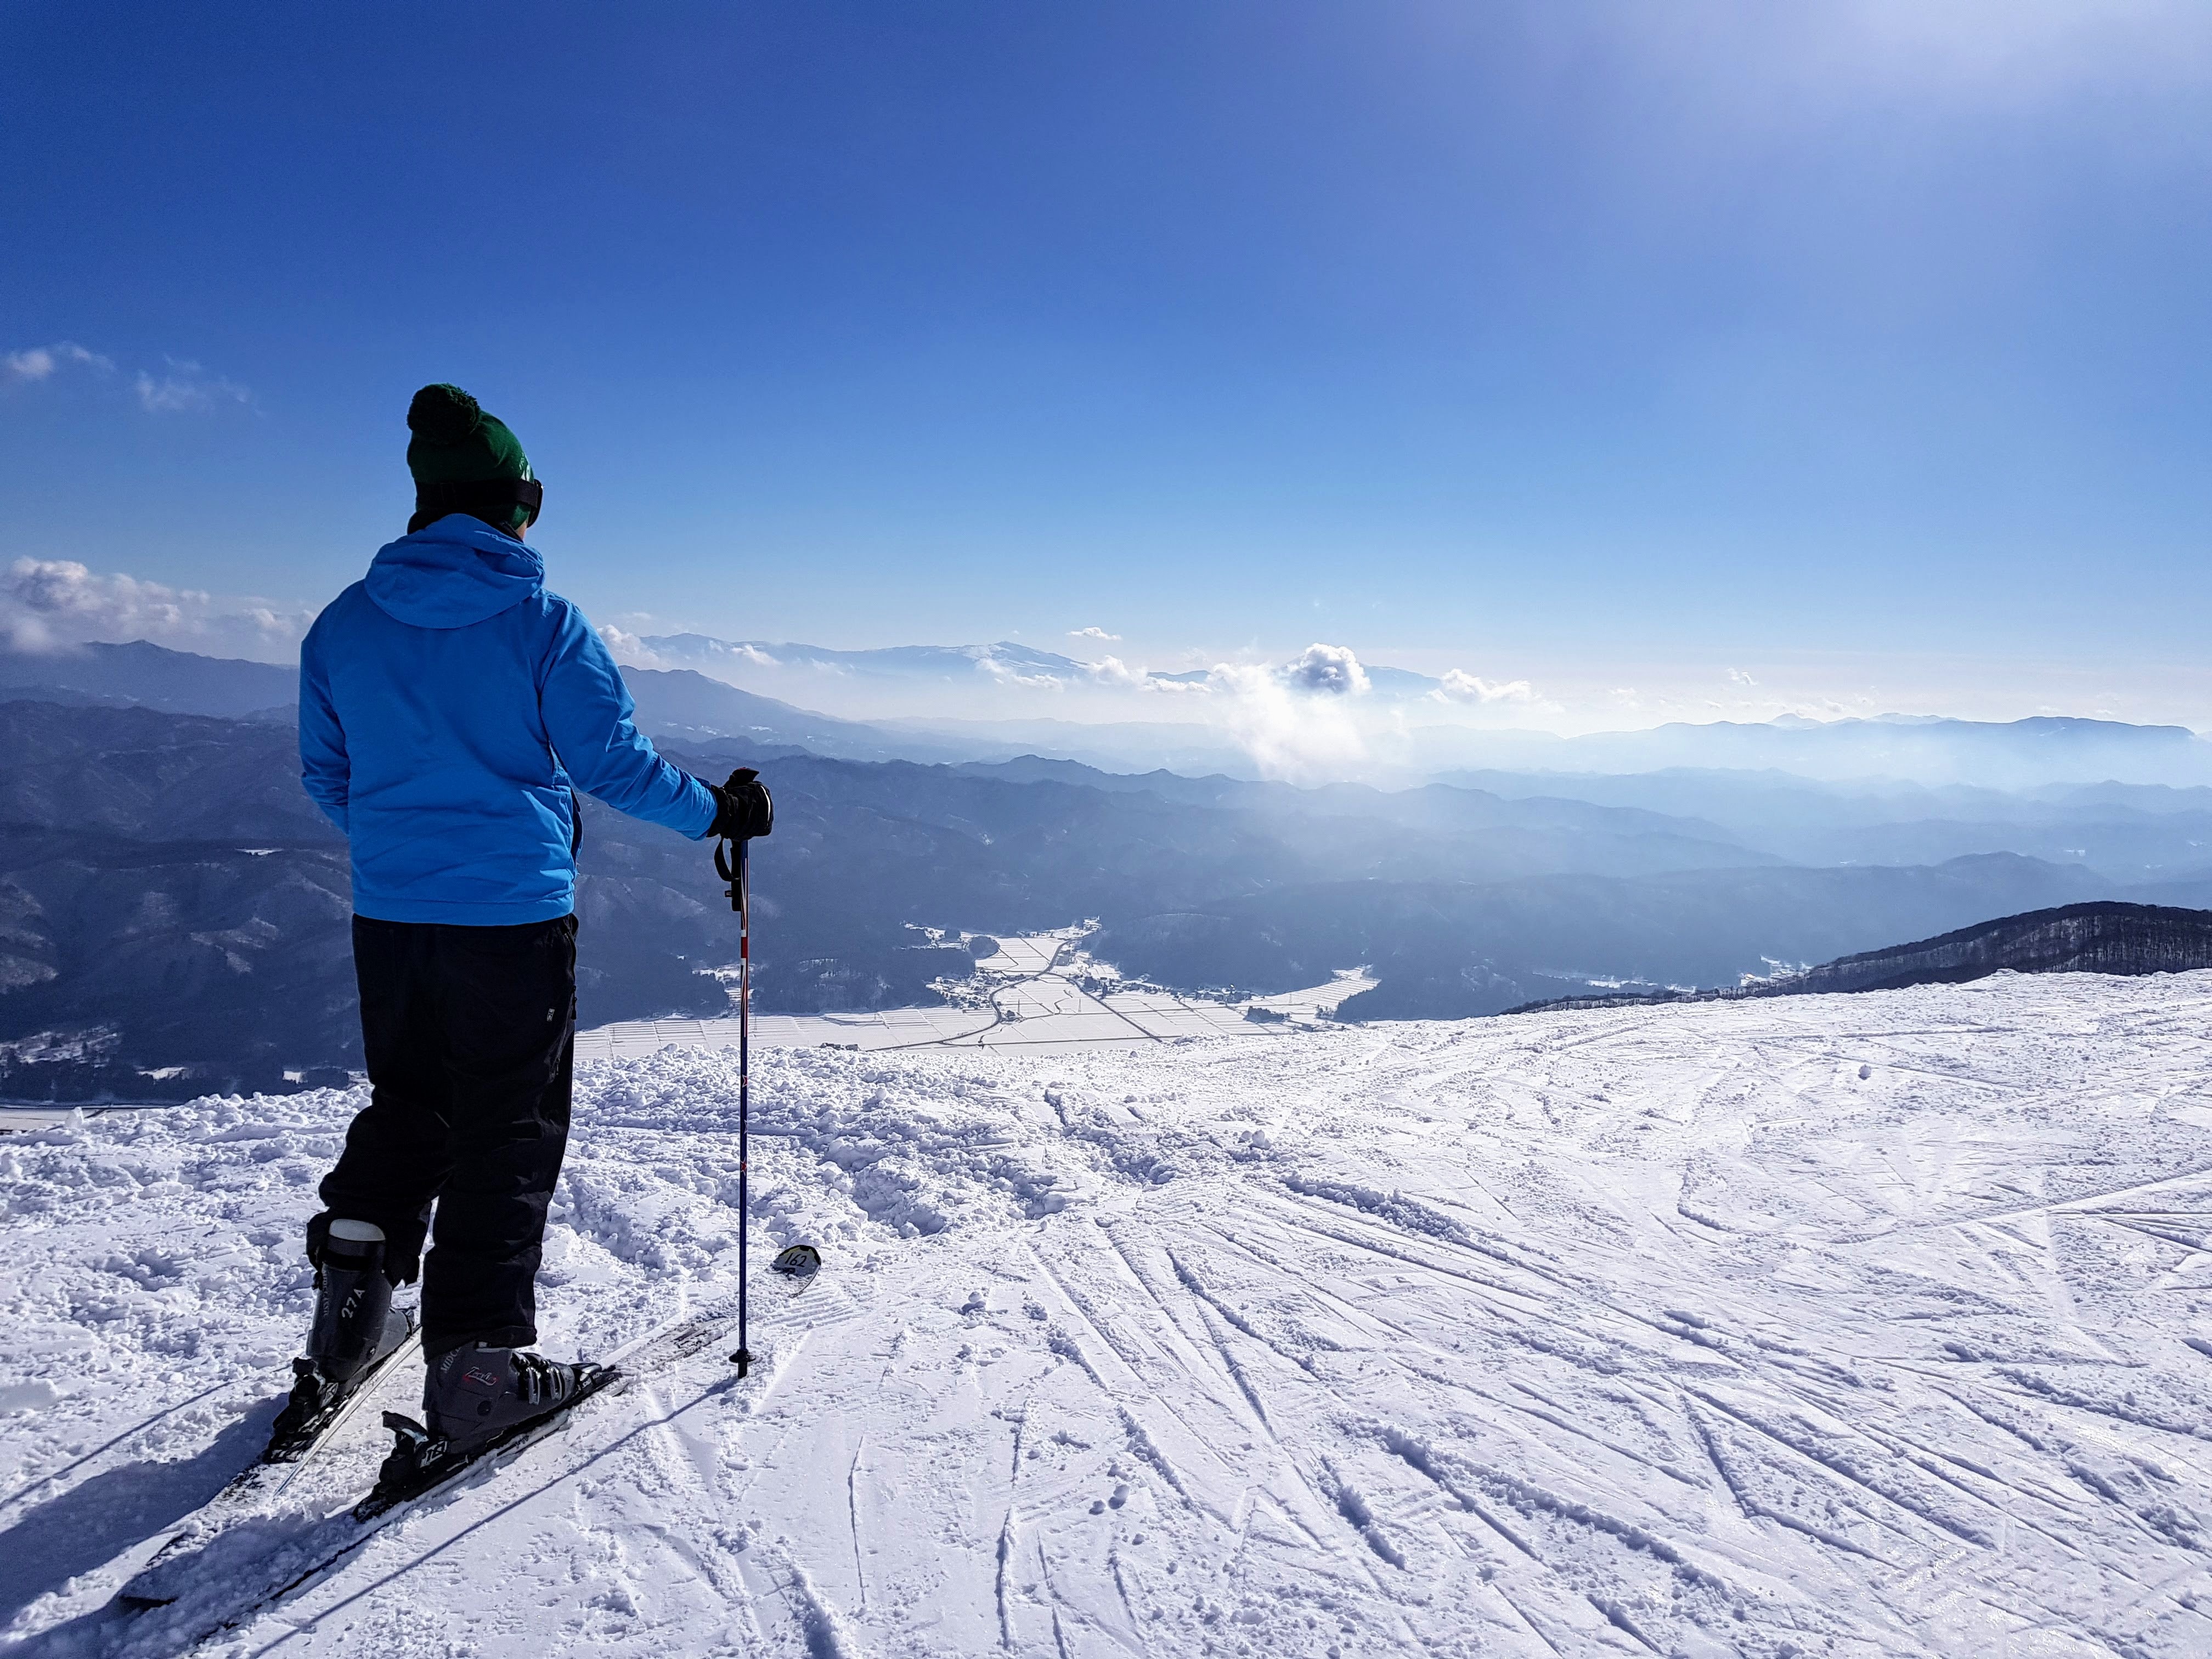 What Skiing Can Teach Us About Taking Advantage of ‘Adverse’ Conditions